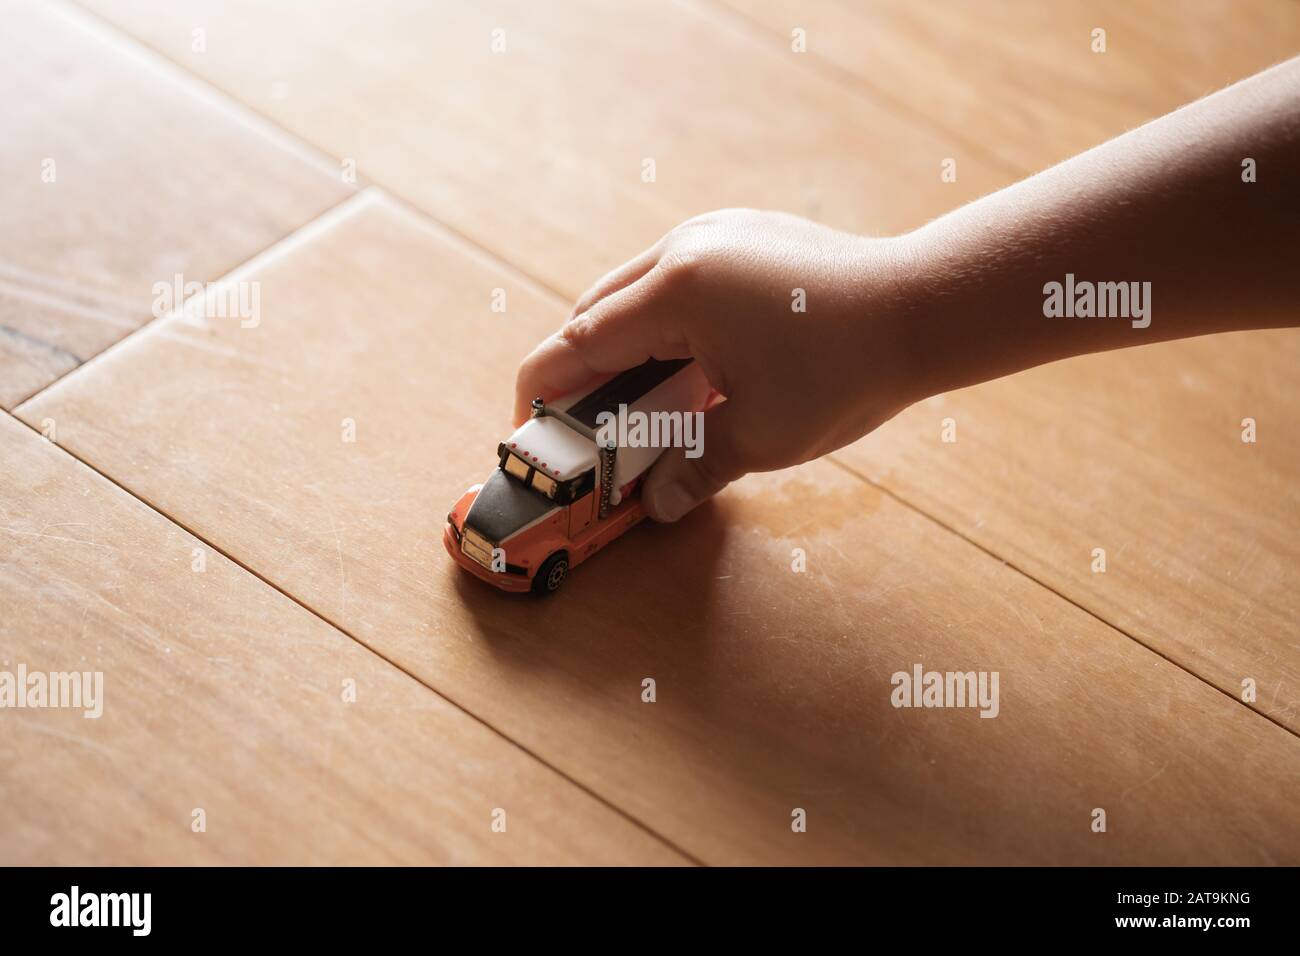 A preschool age child's hand playing with toy truck on wooden floor, imaginative play Stock Photo